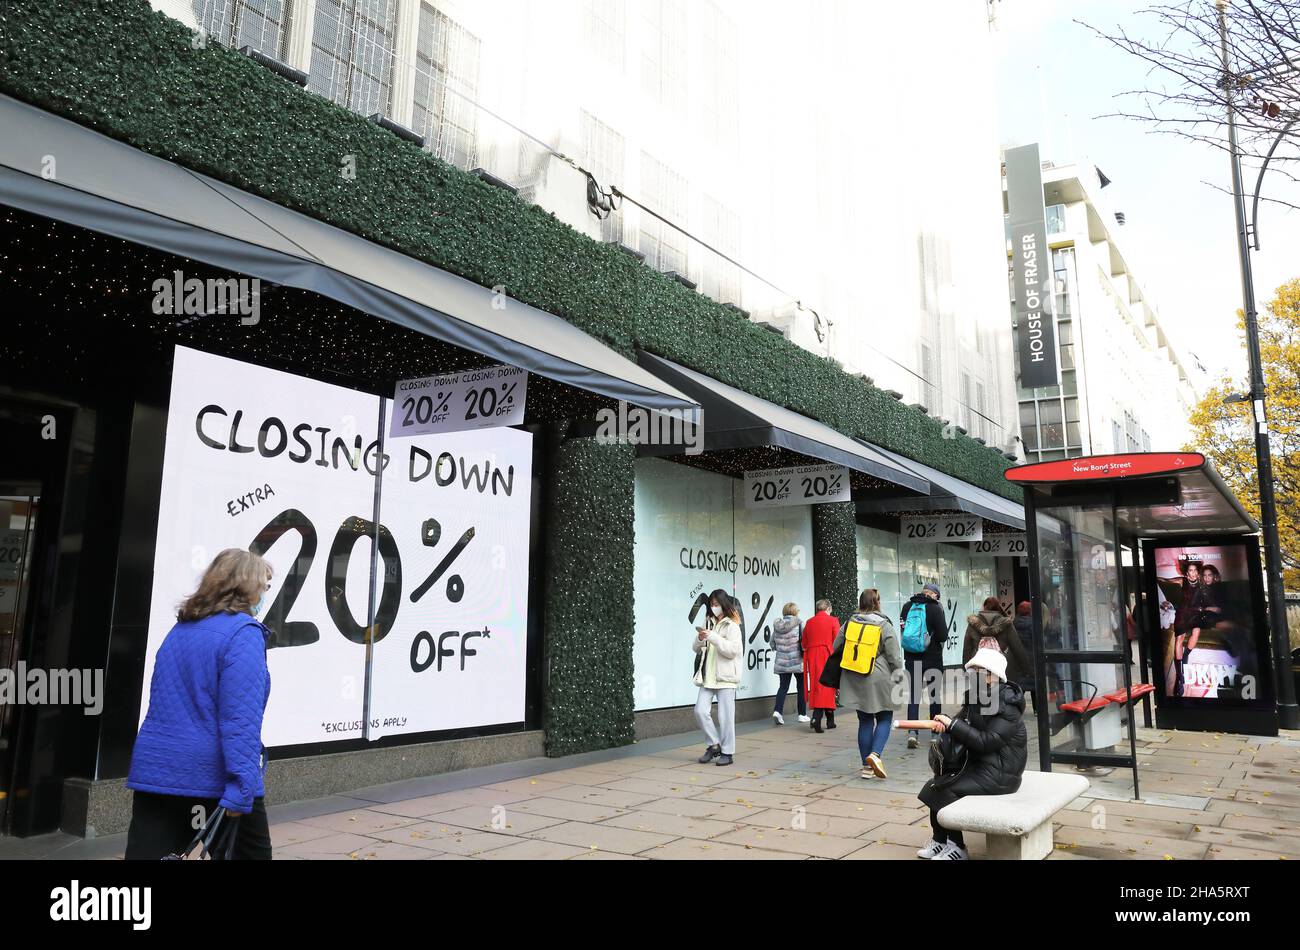 House of Fraser department store due to close down in January 2022, amidst the coronavirus pandemic economic downturn for bricks and mortar shops, on Oxford Street, London, UK Stock Photo